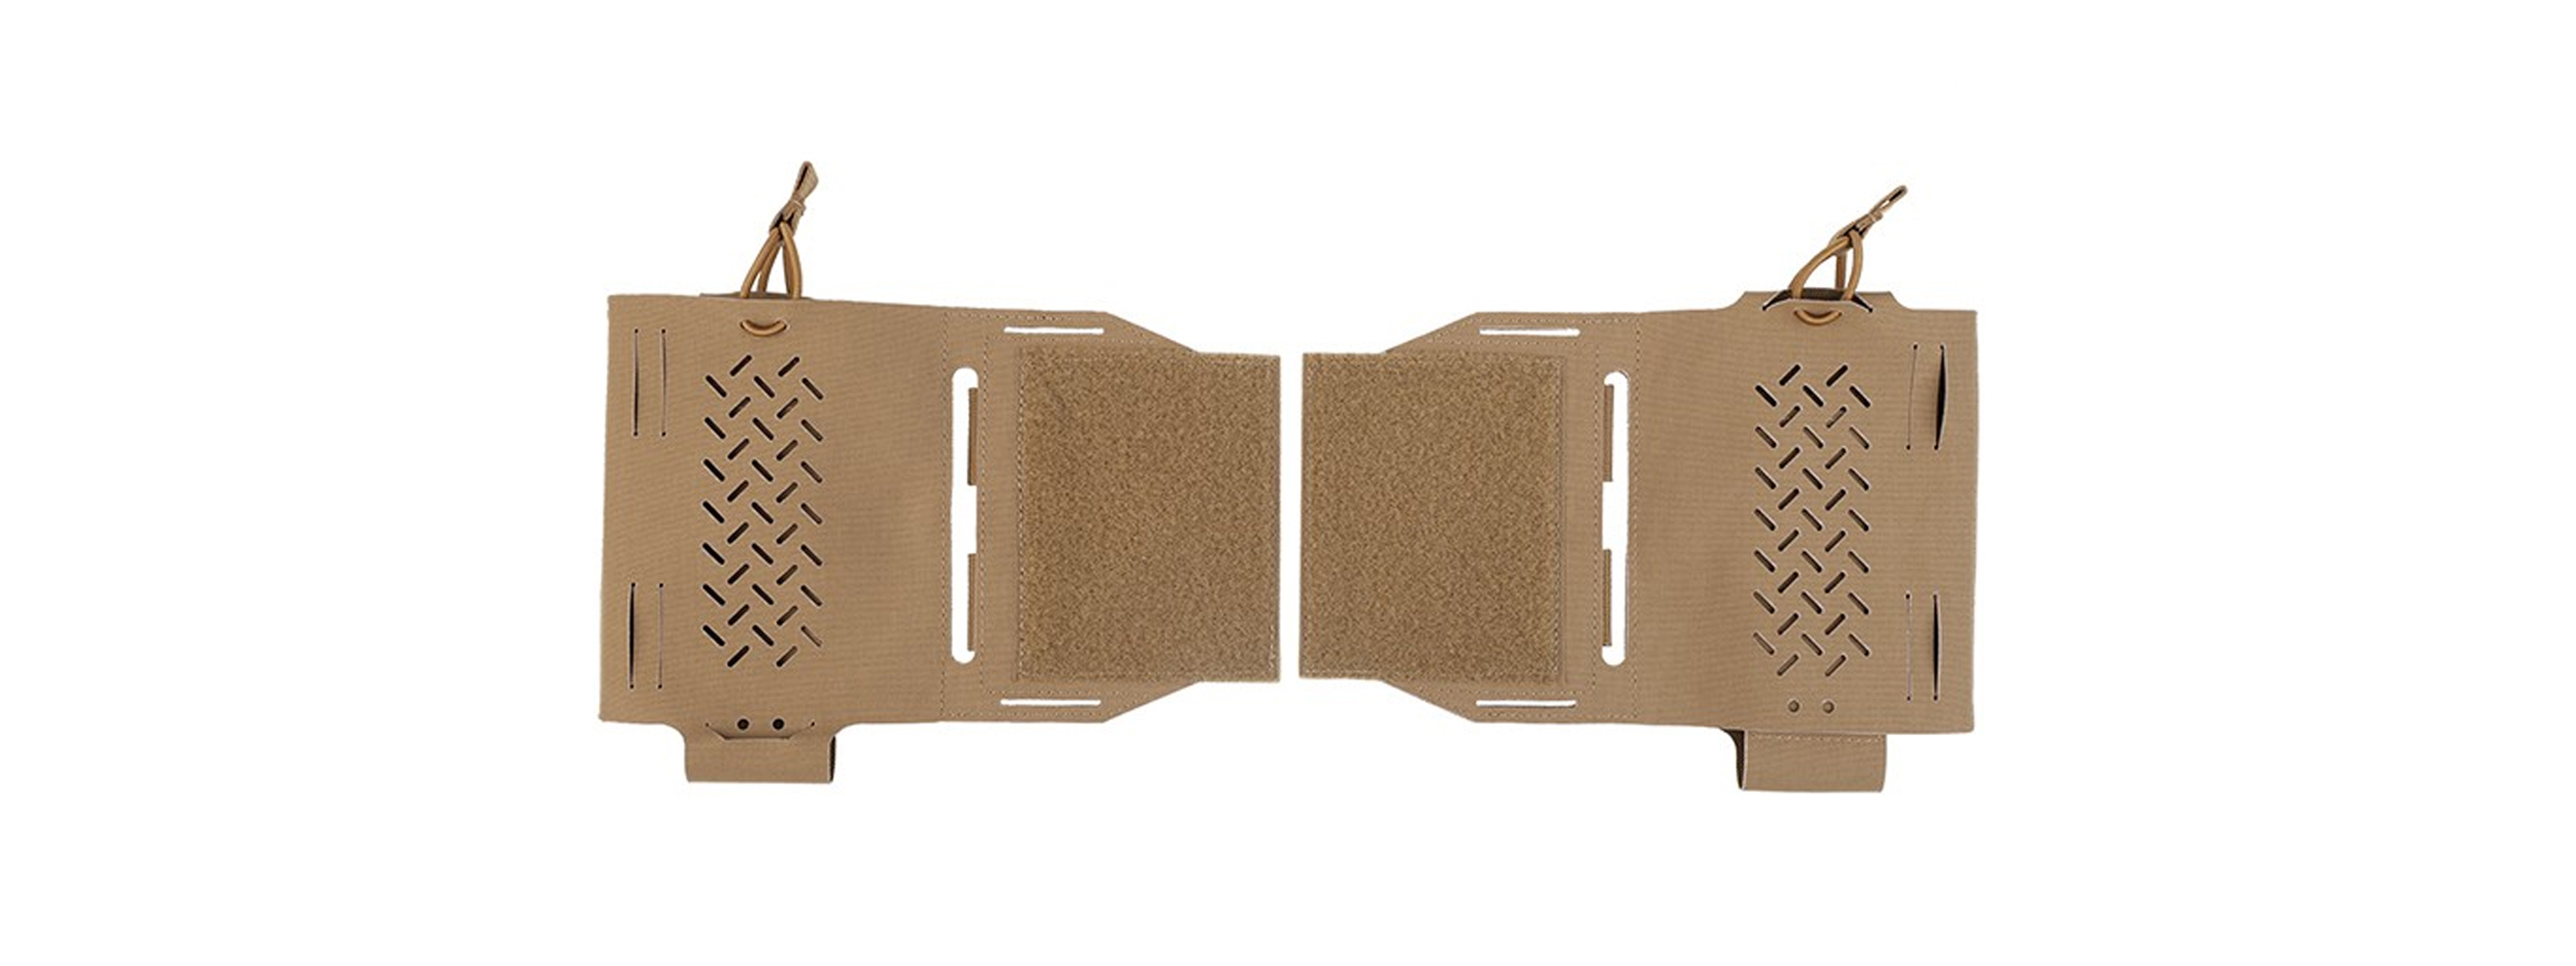 MK2 Expander Wing Pouches For Tactical Vests - (Tan)